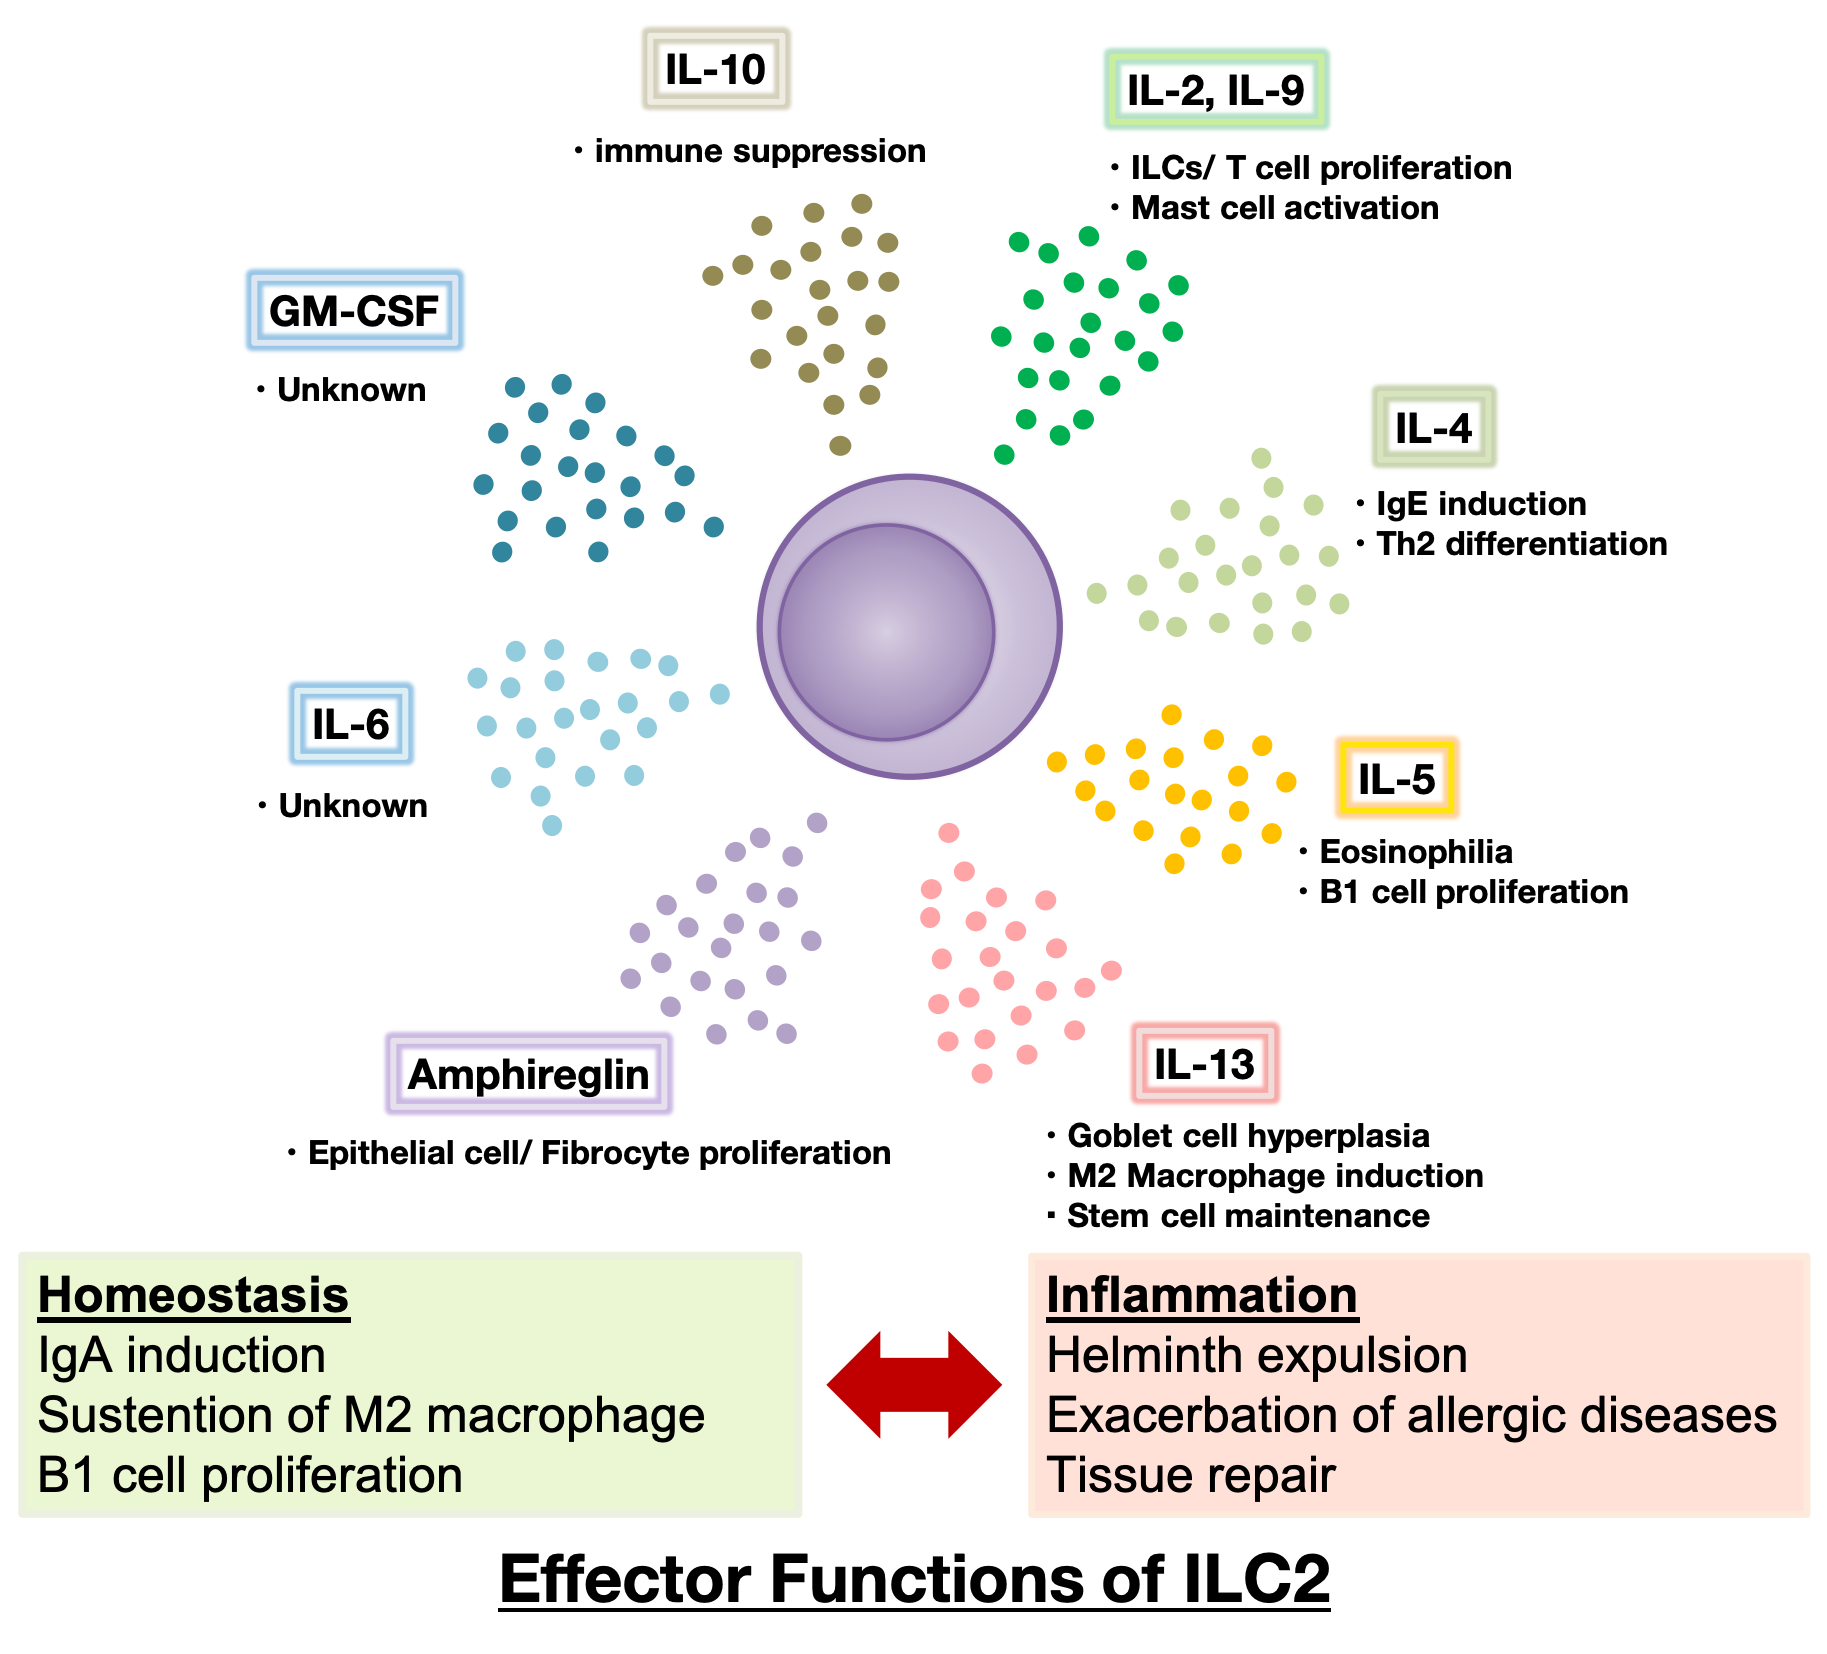 Effector Functions of ILC2